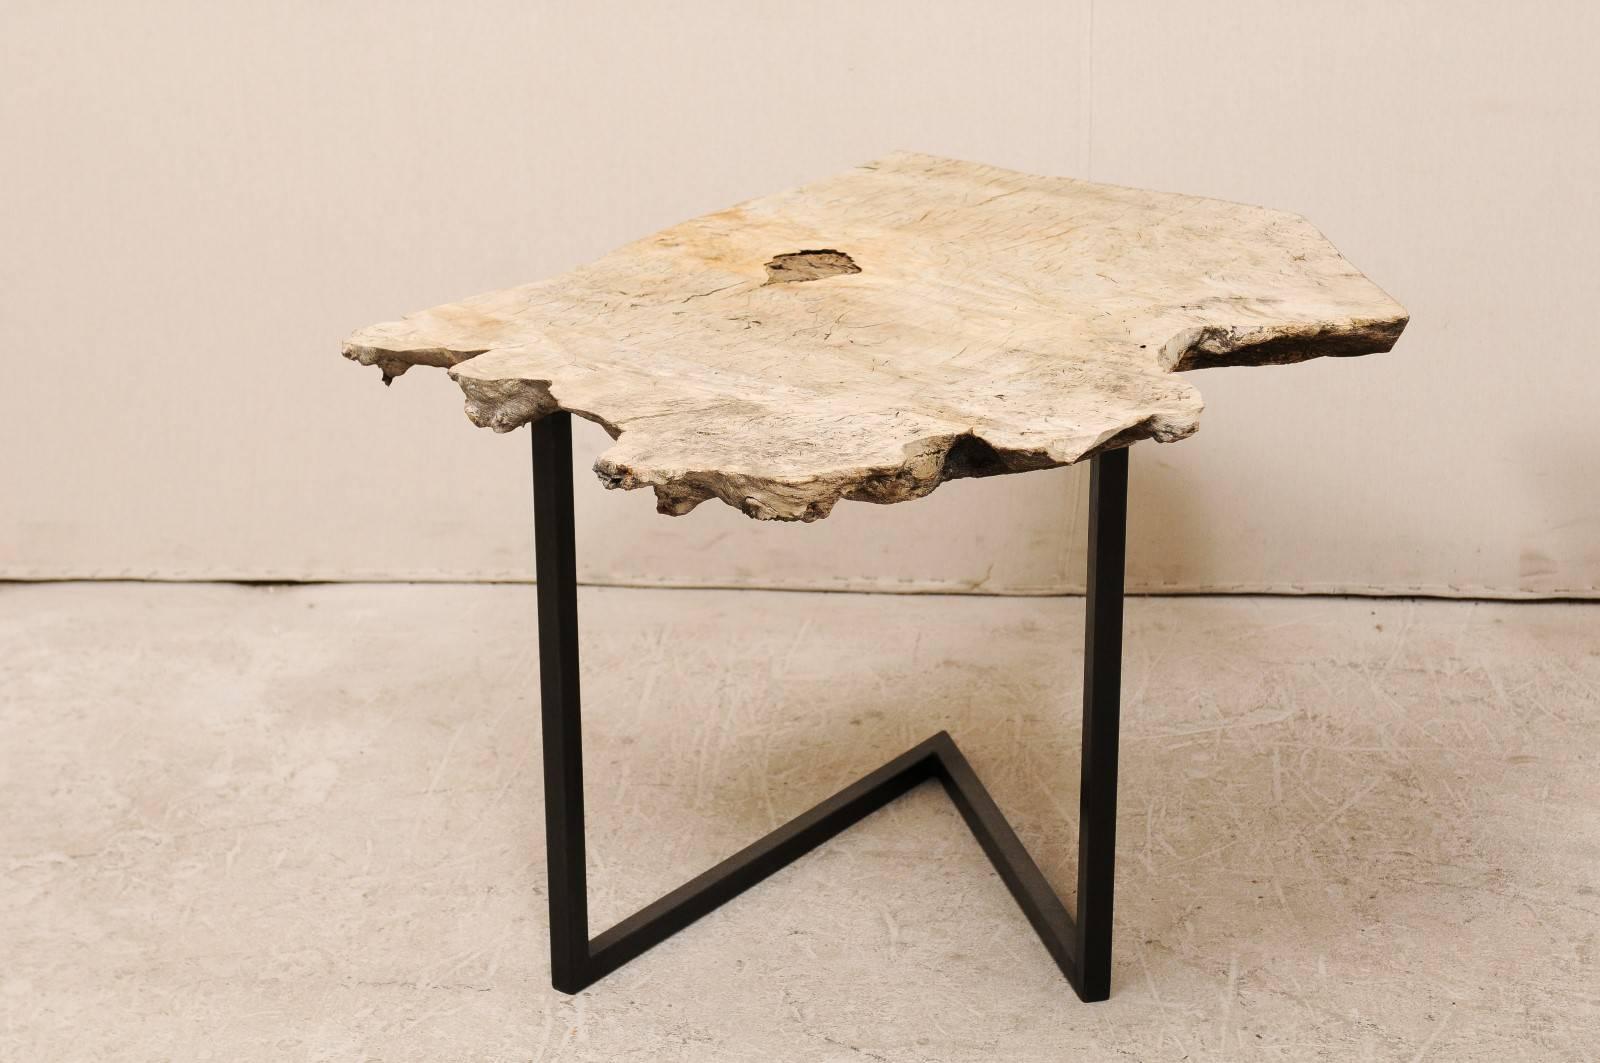 A single European contemporary style custom created burl top occasional table with iron base. This rustic yet chic side / drink table is made up from a thickly sliced old burled wood slab, which has been mounted onto a newer custom black iron base.